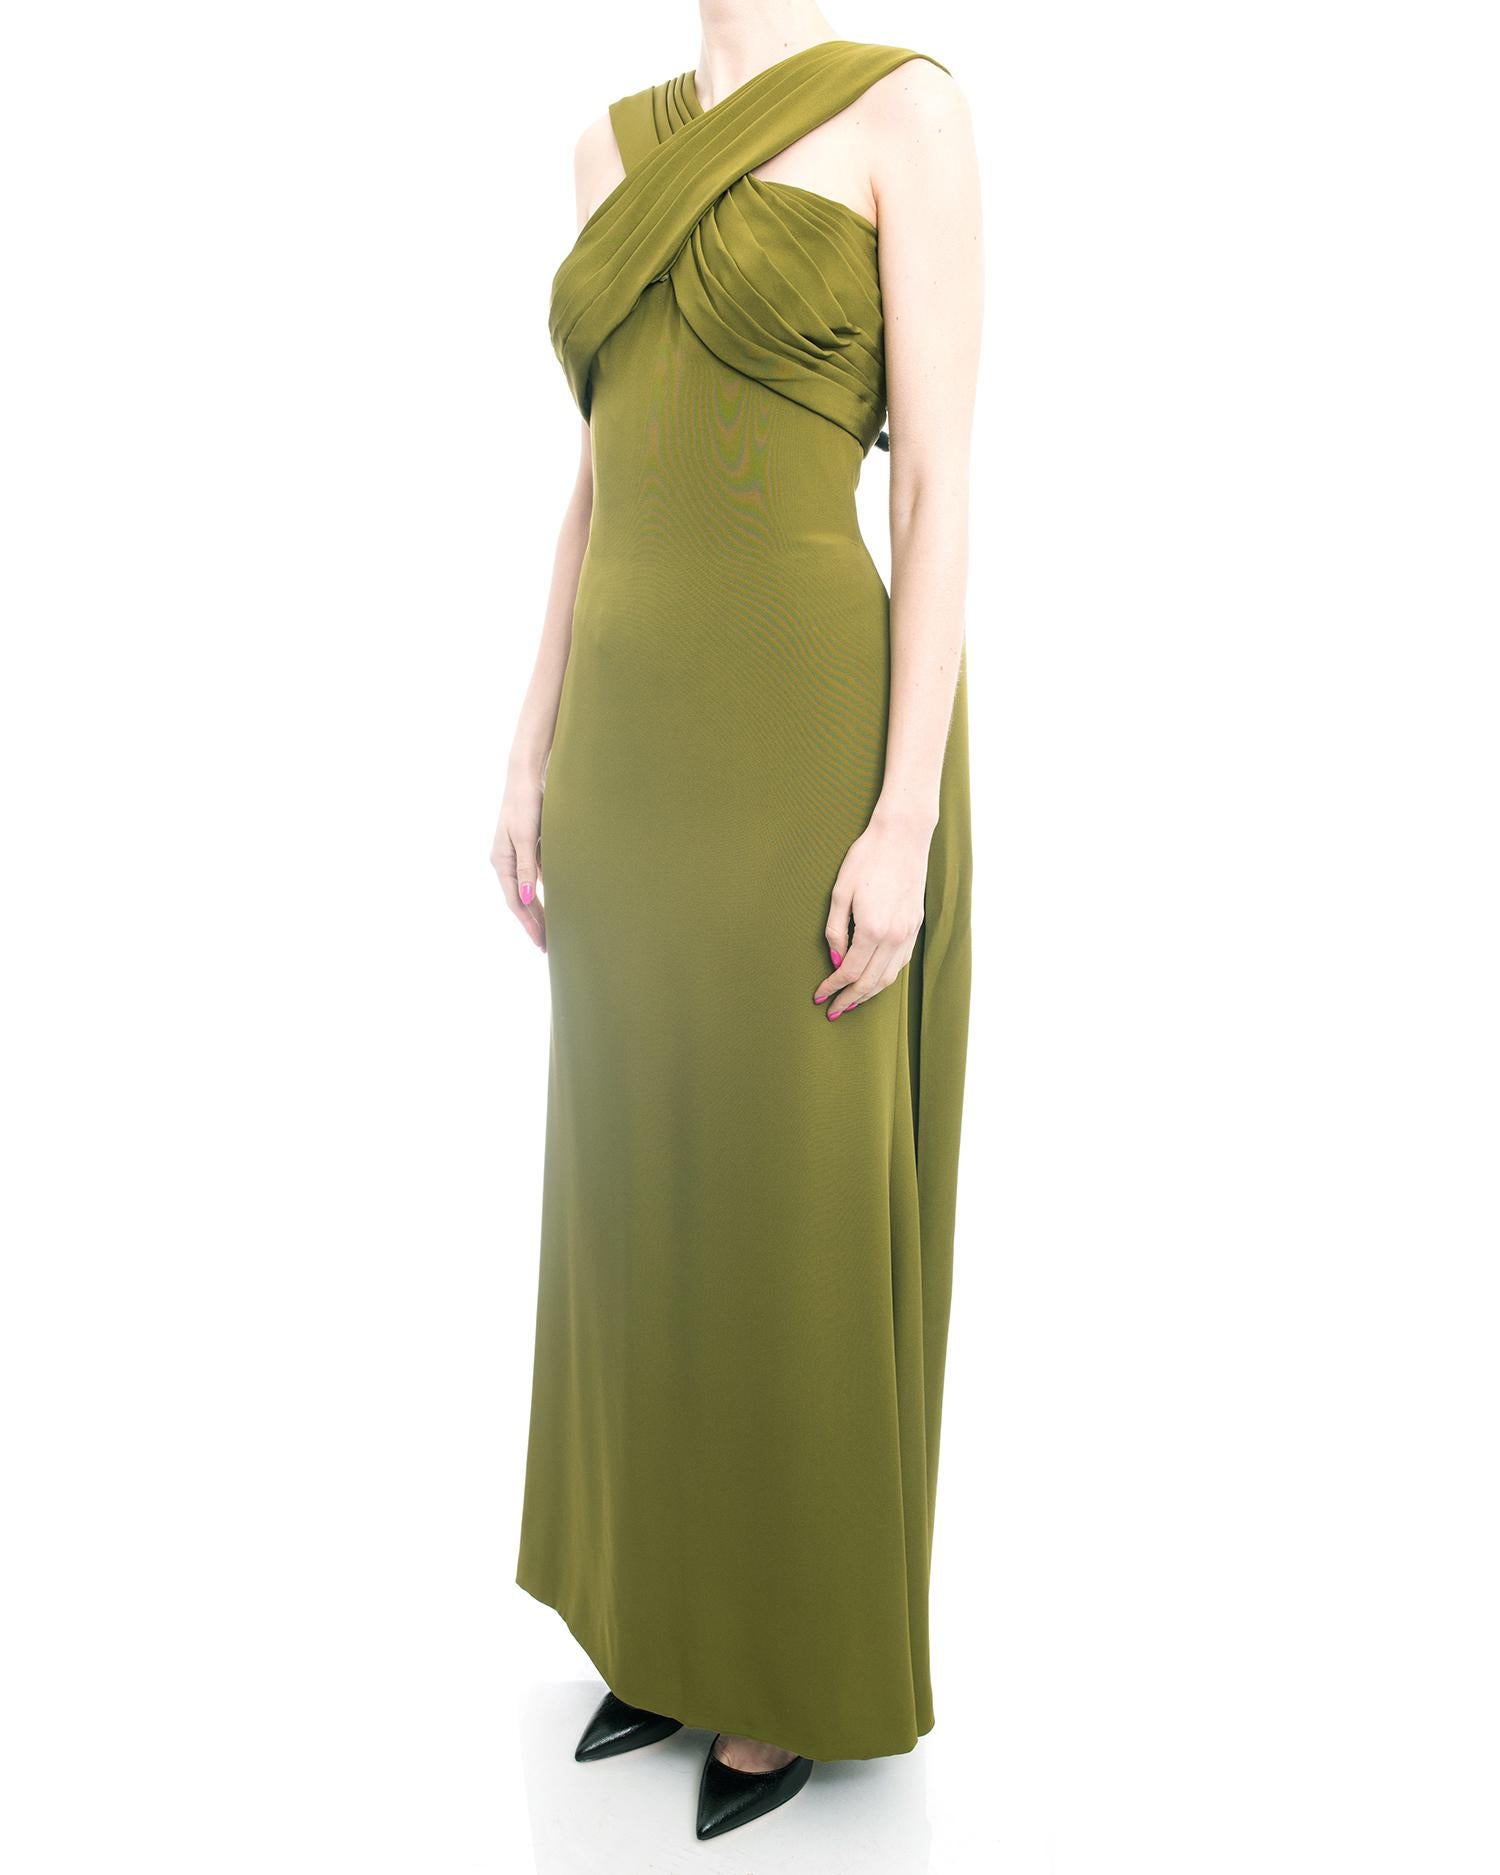 Yves Saint Laurent Haute Couture Vintage 1990’s Olive Green Gown For Sale 1